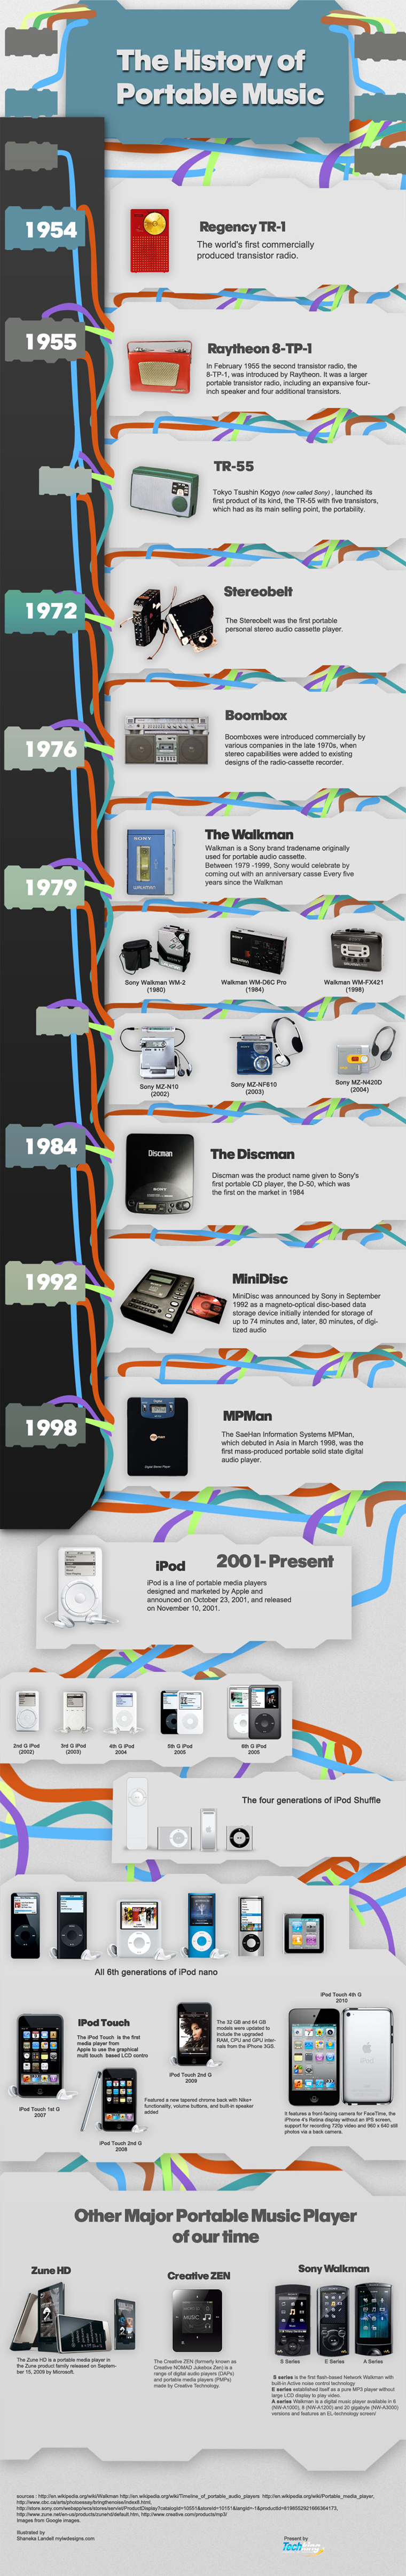 The Evolution of Portable Music - Infographic